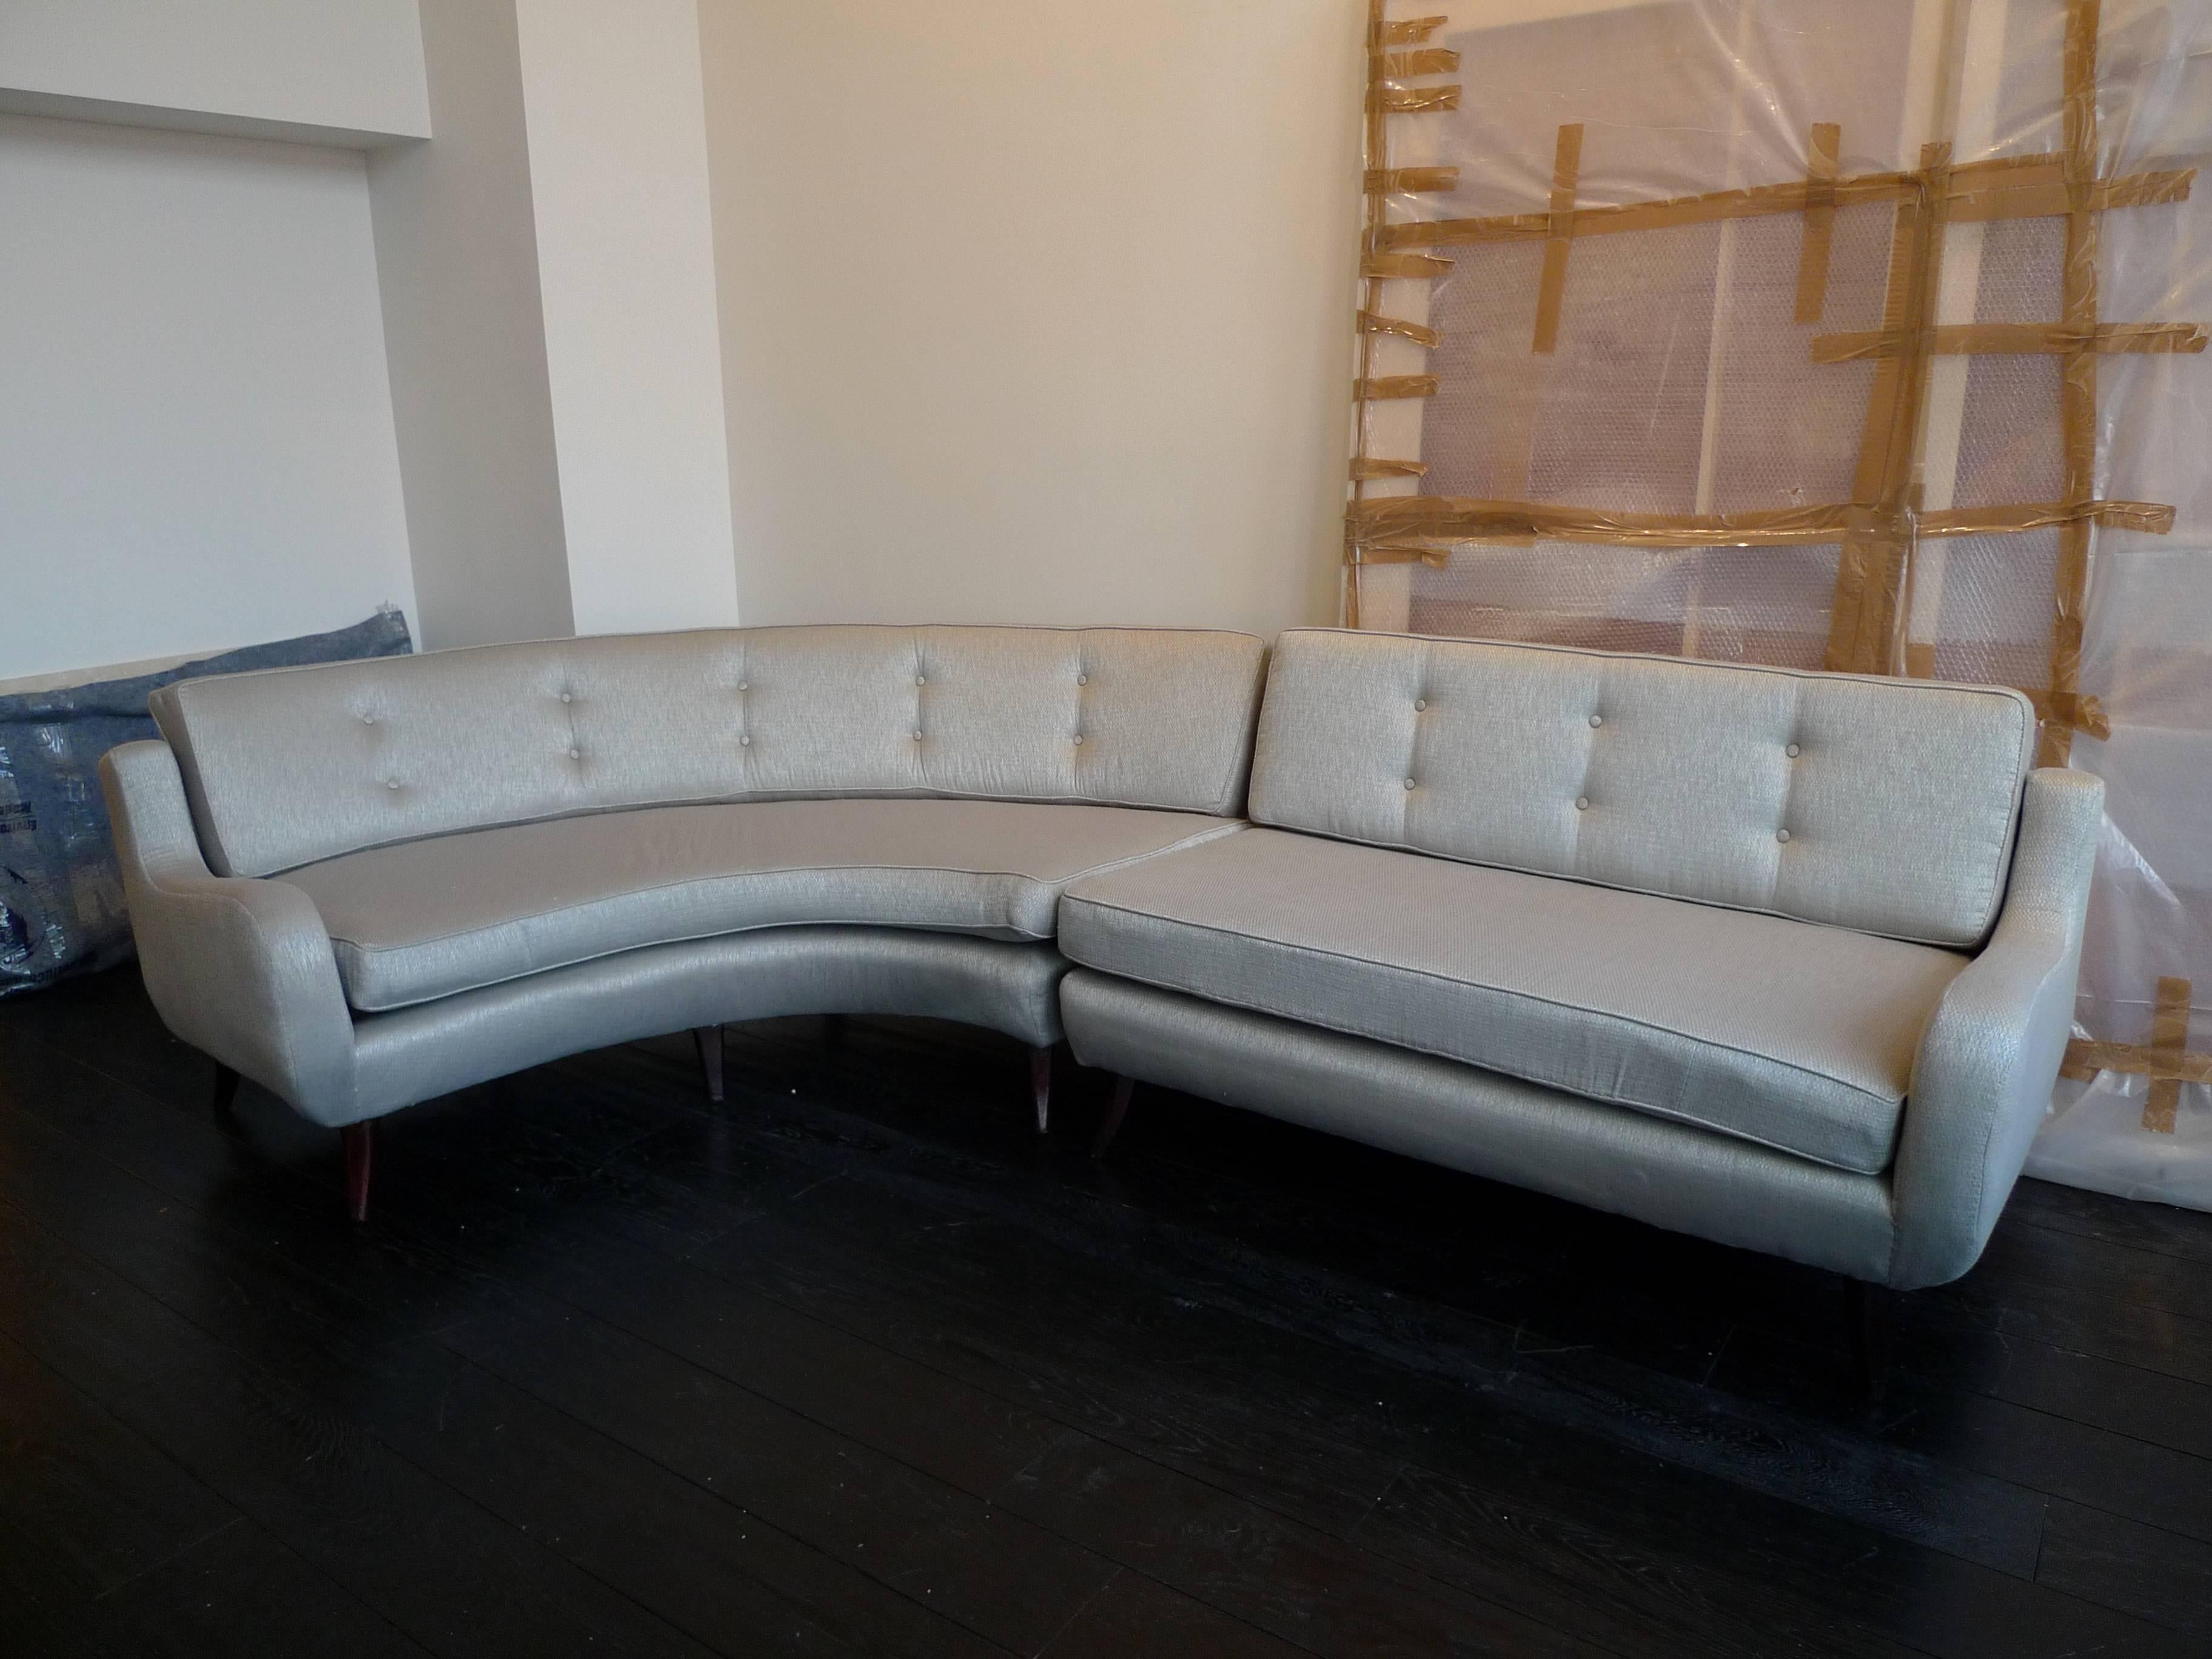 Ernst Schwadron - Two-piece sectional sofa wood and fabric, circa 1955.
Newly reupholstered.

Dimensions of each piece are:
Curved sofa: 72" L X 63" W x 35" D; 
Straight sofa: 57" L x 35" D.

Ernst Schwadron was born the